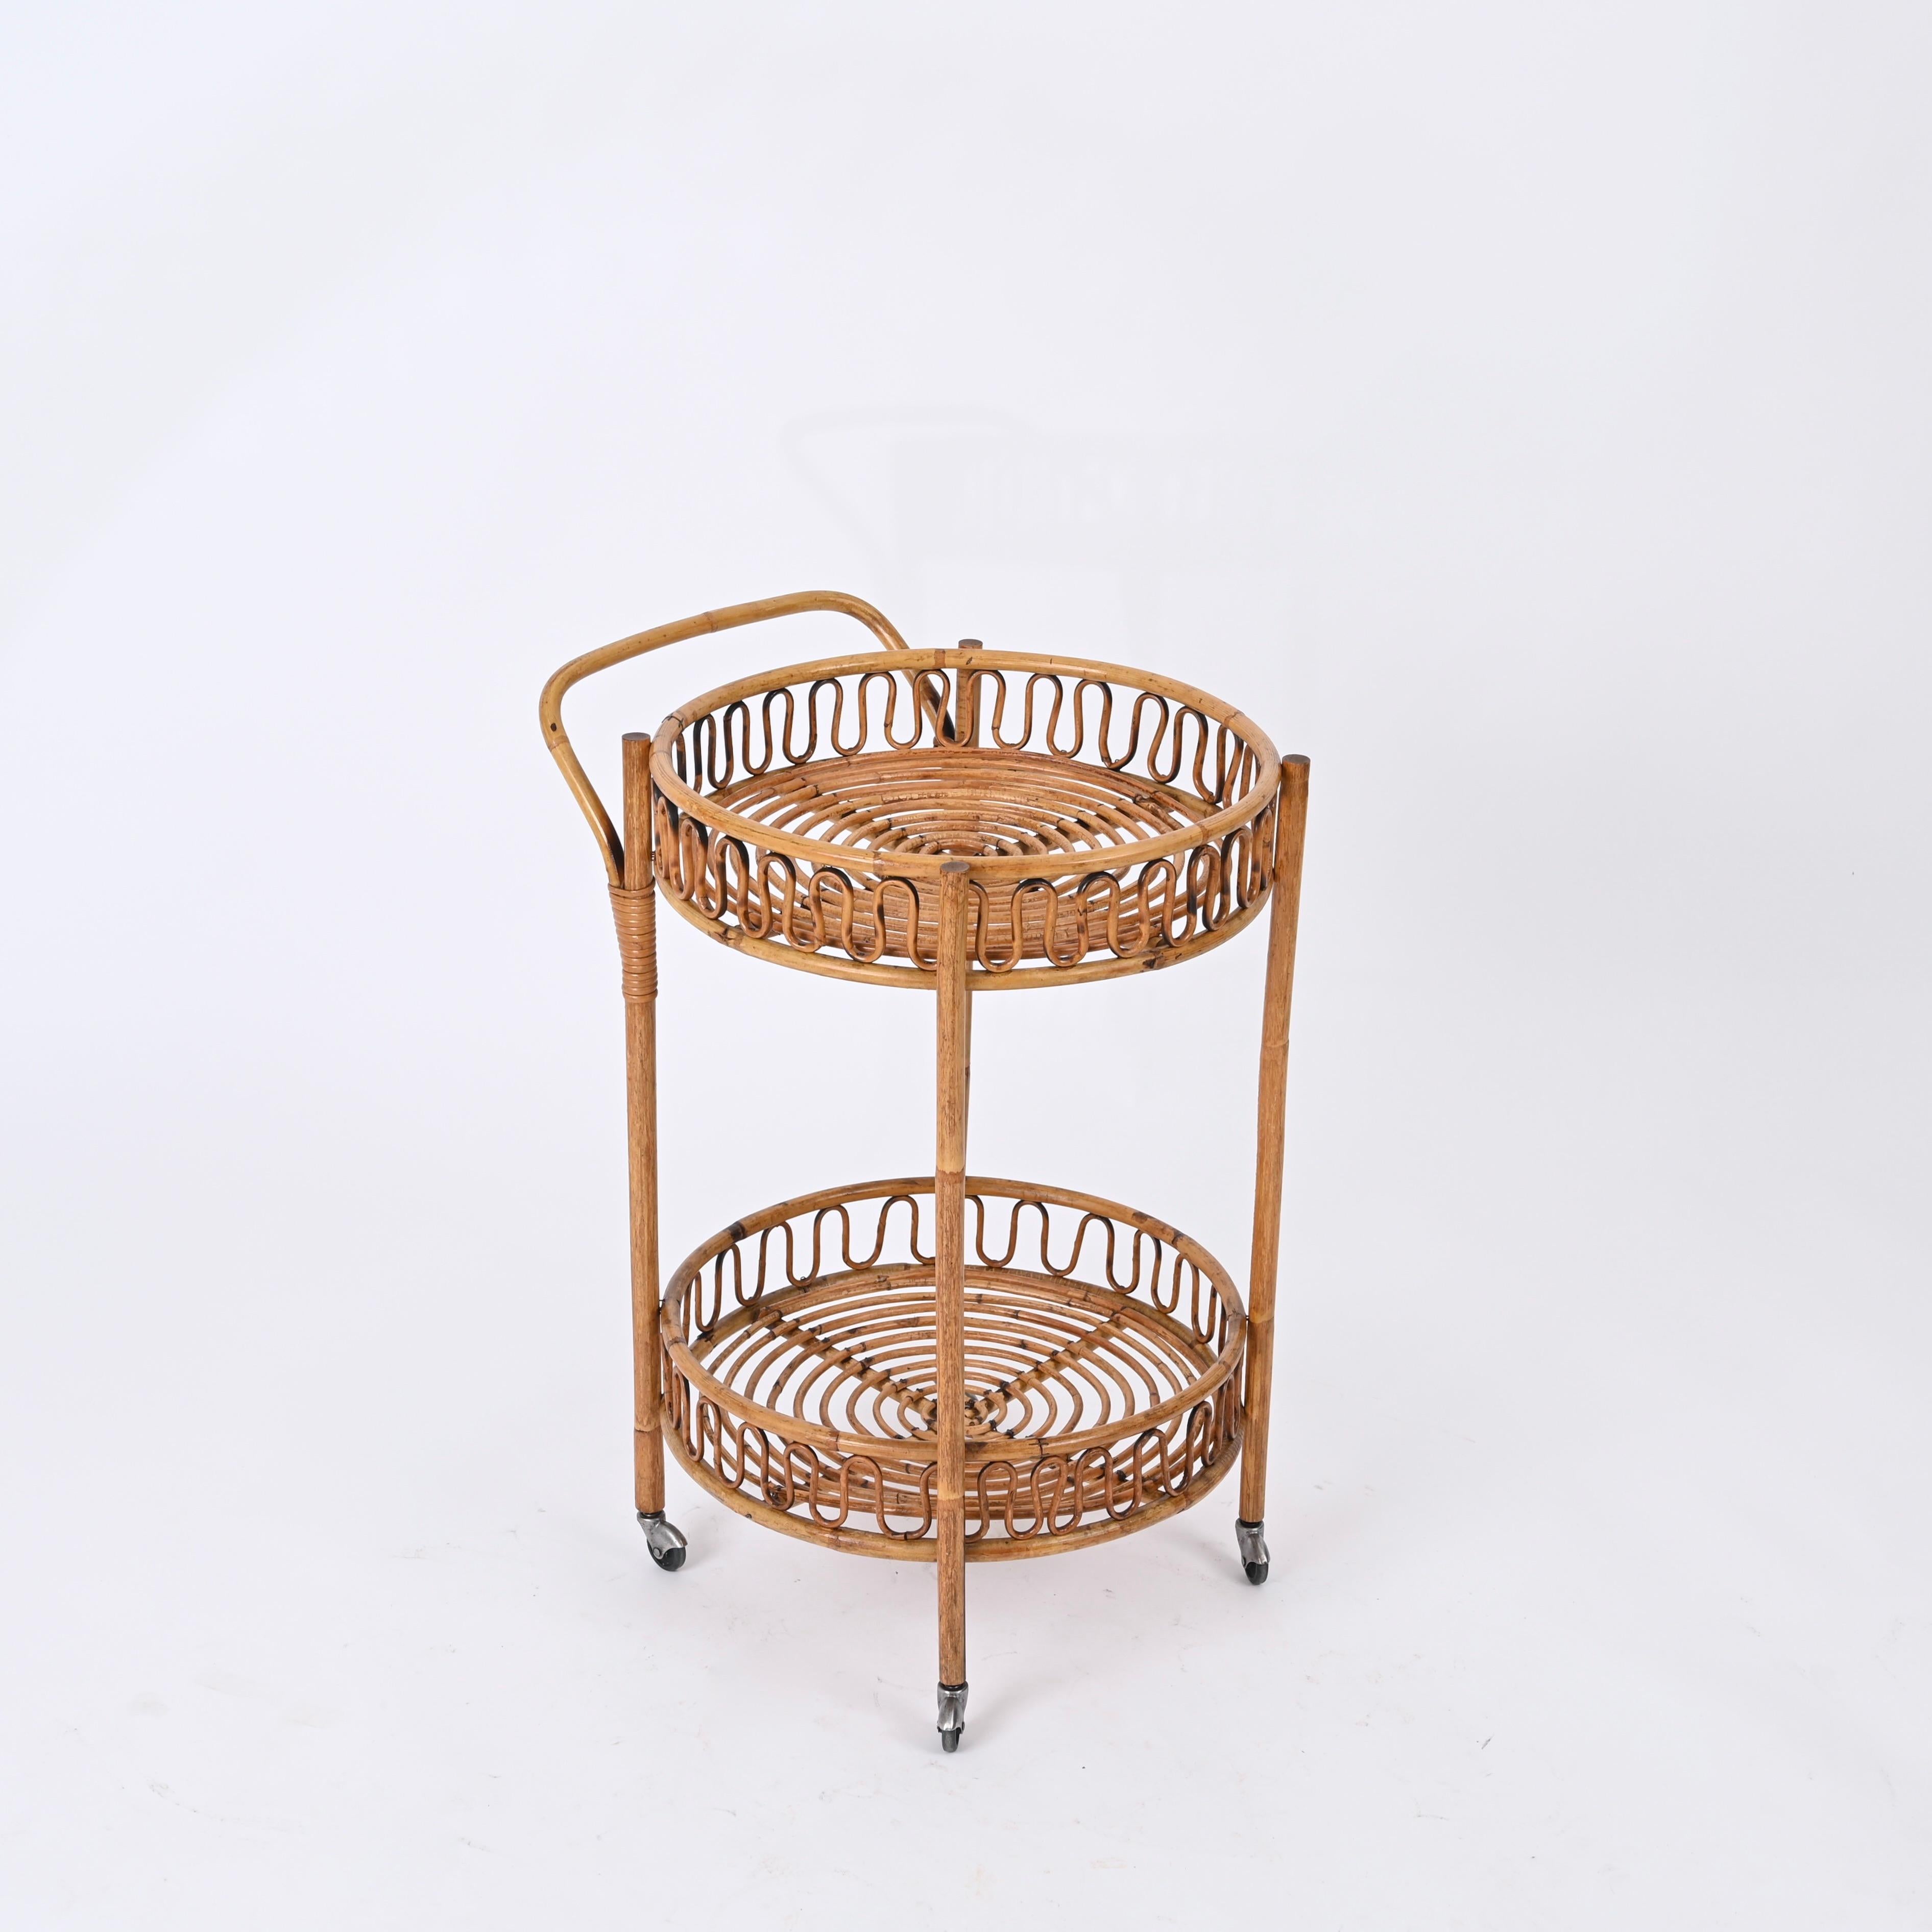 Stunning Mid-Century round bar cart trolley fully made in bamboo, curved rattan and hand-woven wicker. This unique piece was hand-crafted during the 1960s in Italy. with perfect proportions, great example of fine Italian craftsmanship from the